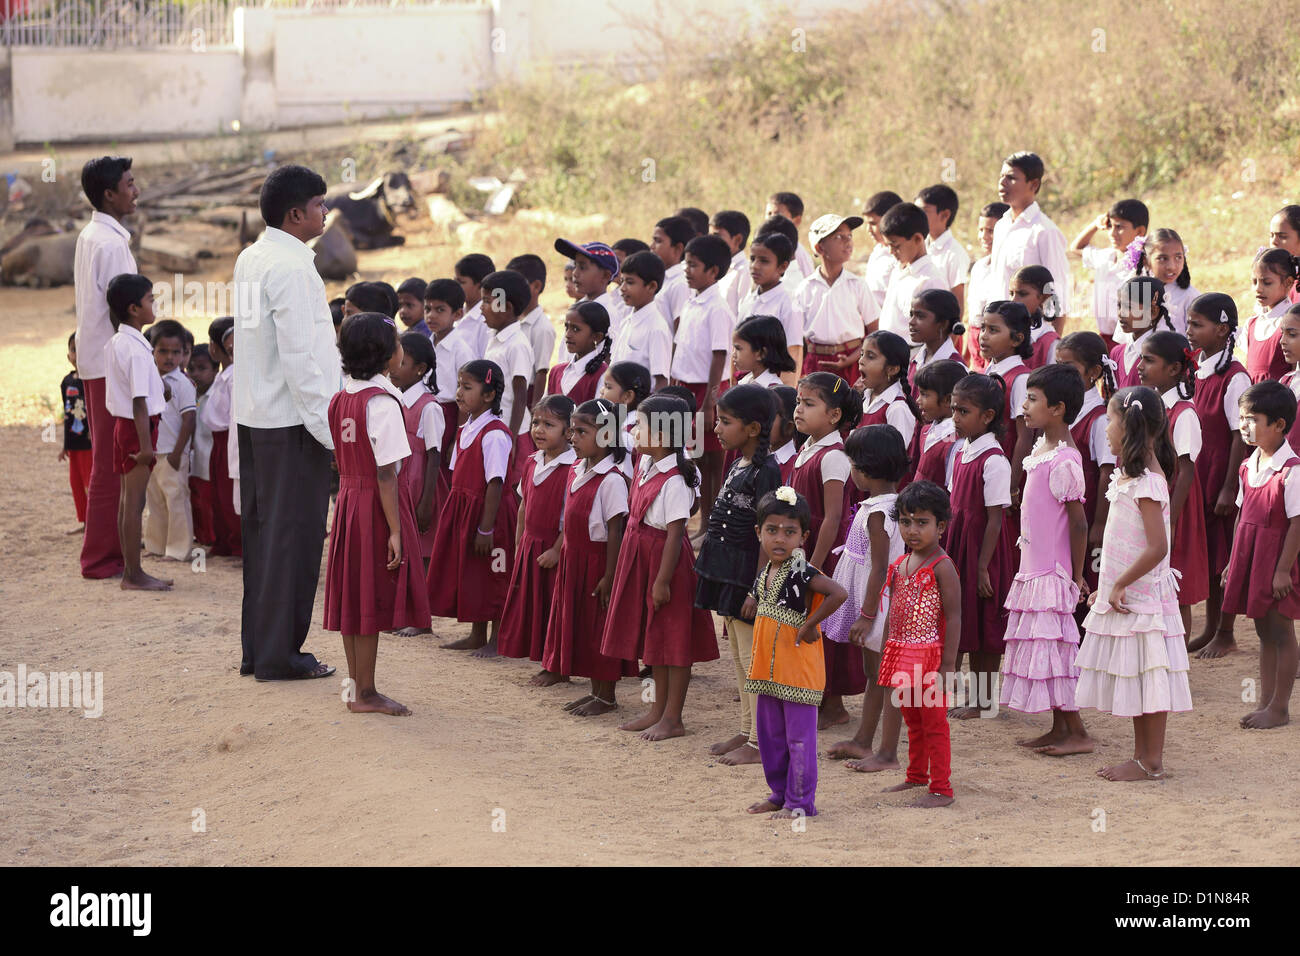 School Children Uniform High Resolution Stock Photography and Images - Alamy